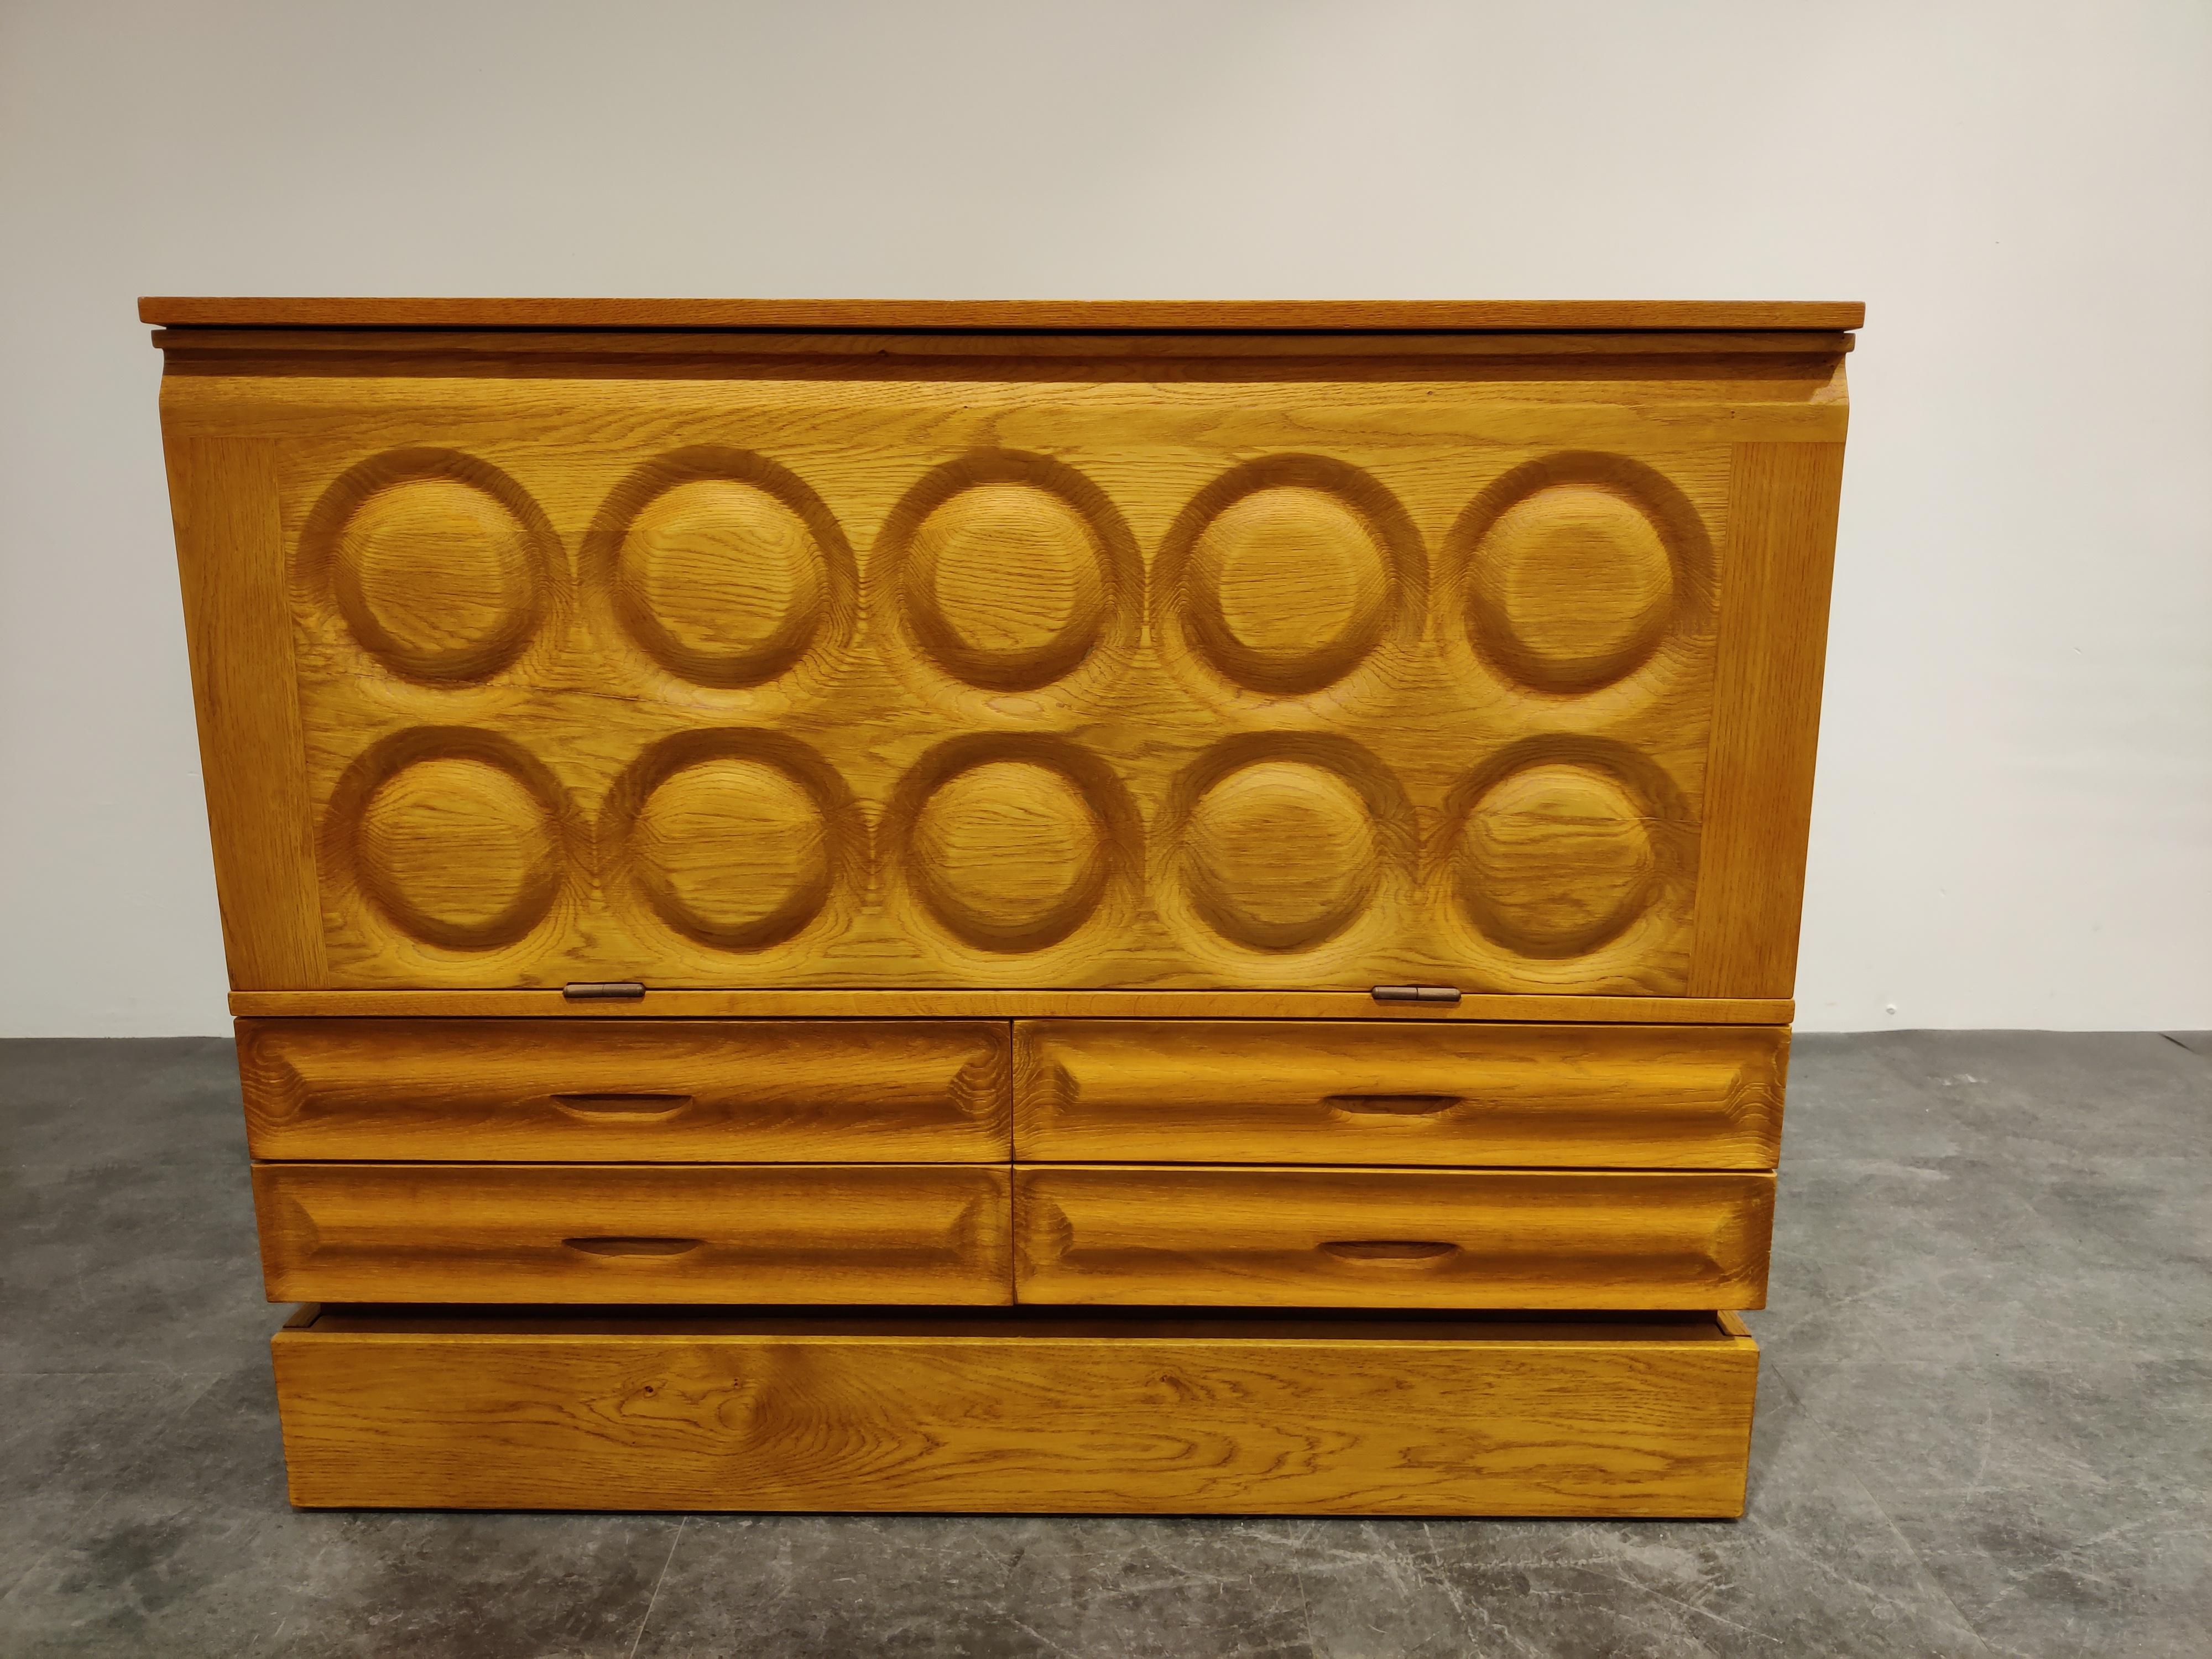 Midcentury graphical Brutalist bar cabinet with 4 drawers and a fold down door.

Beautiful timeless design in clear oak

Lovely carved handles in the drawers. 

Good condition.

1970s, Belgium

Dimensions:

Lenght 110cm/43.30